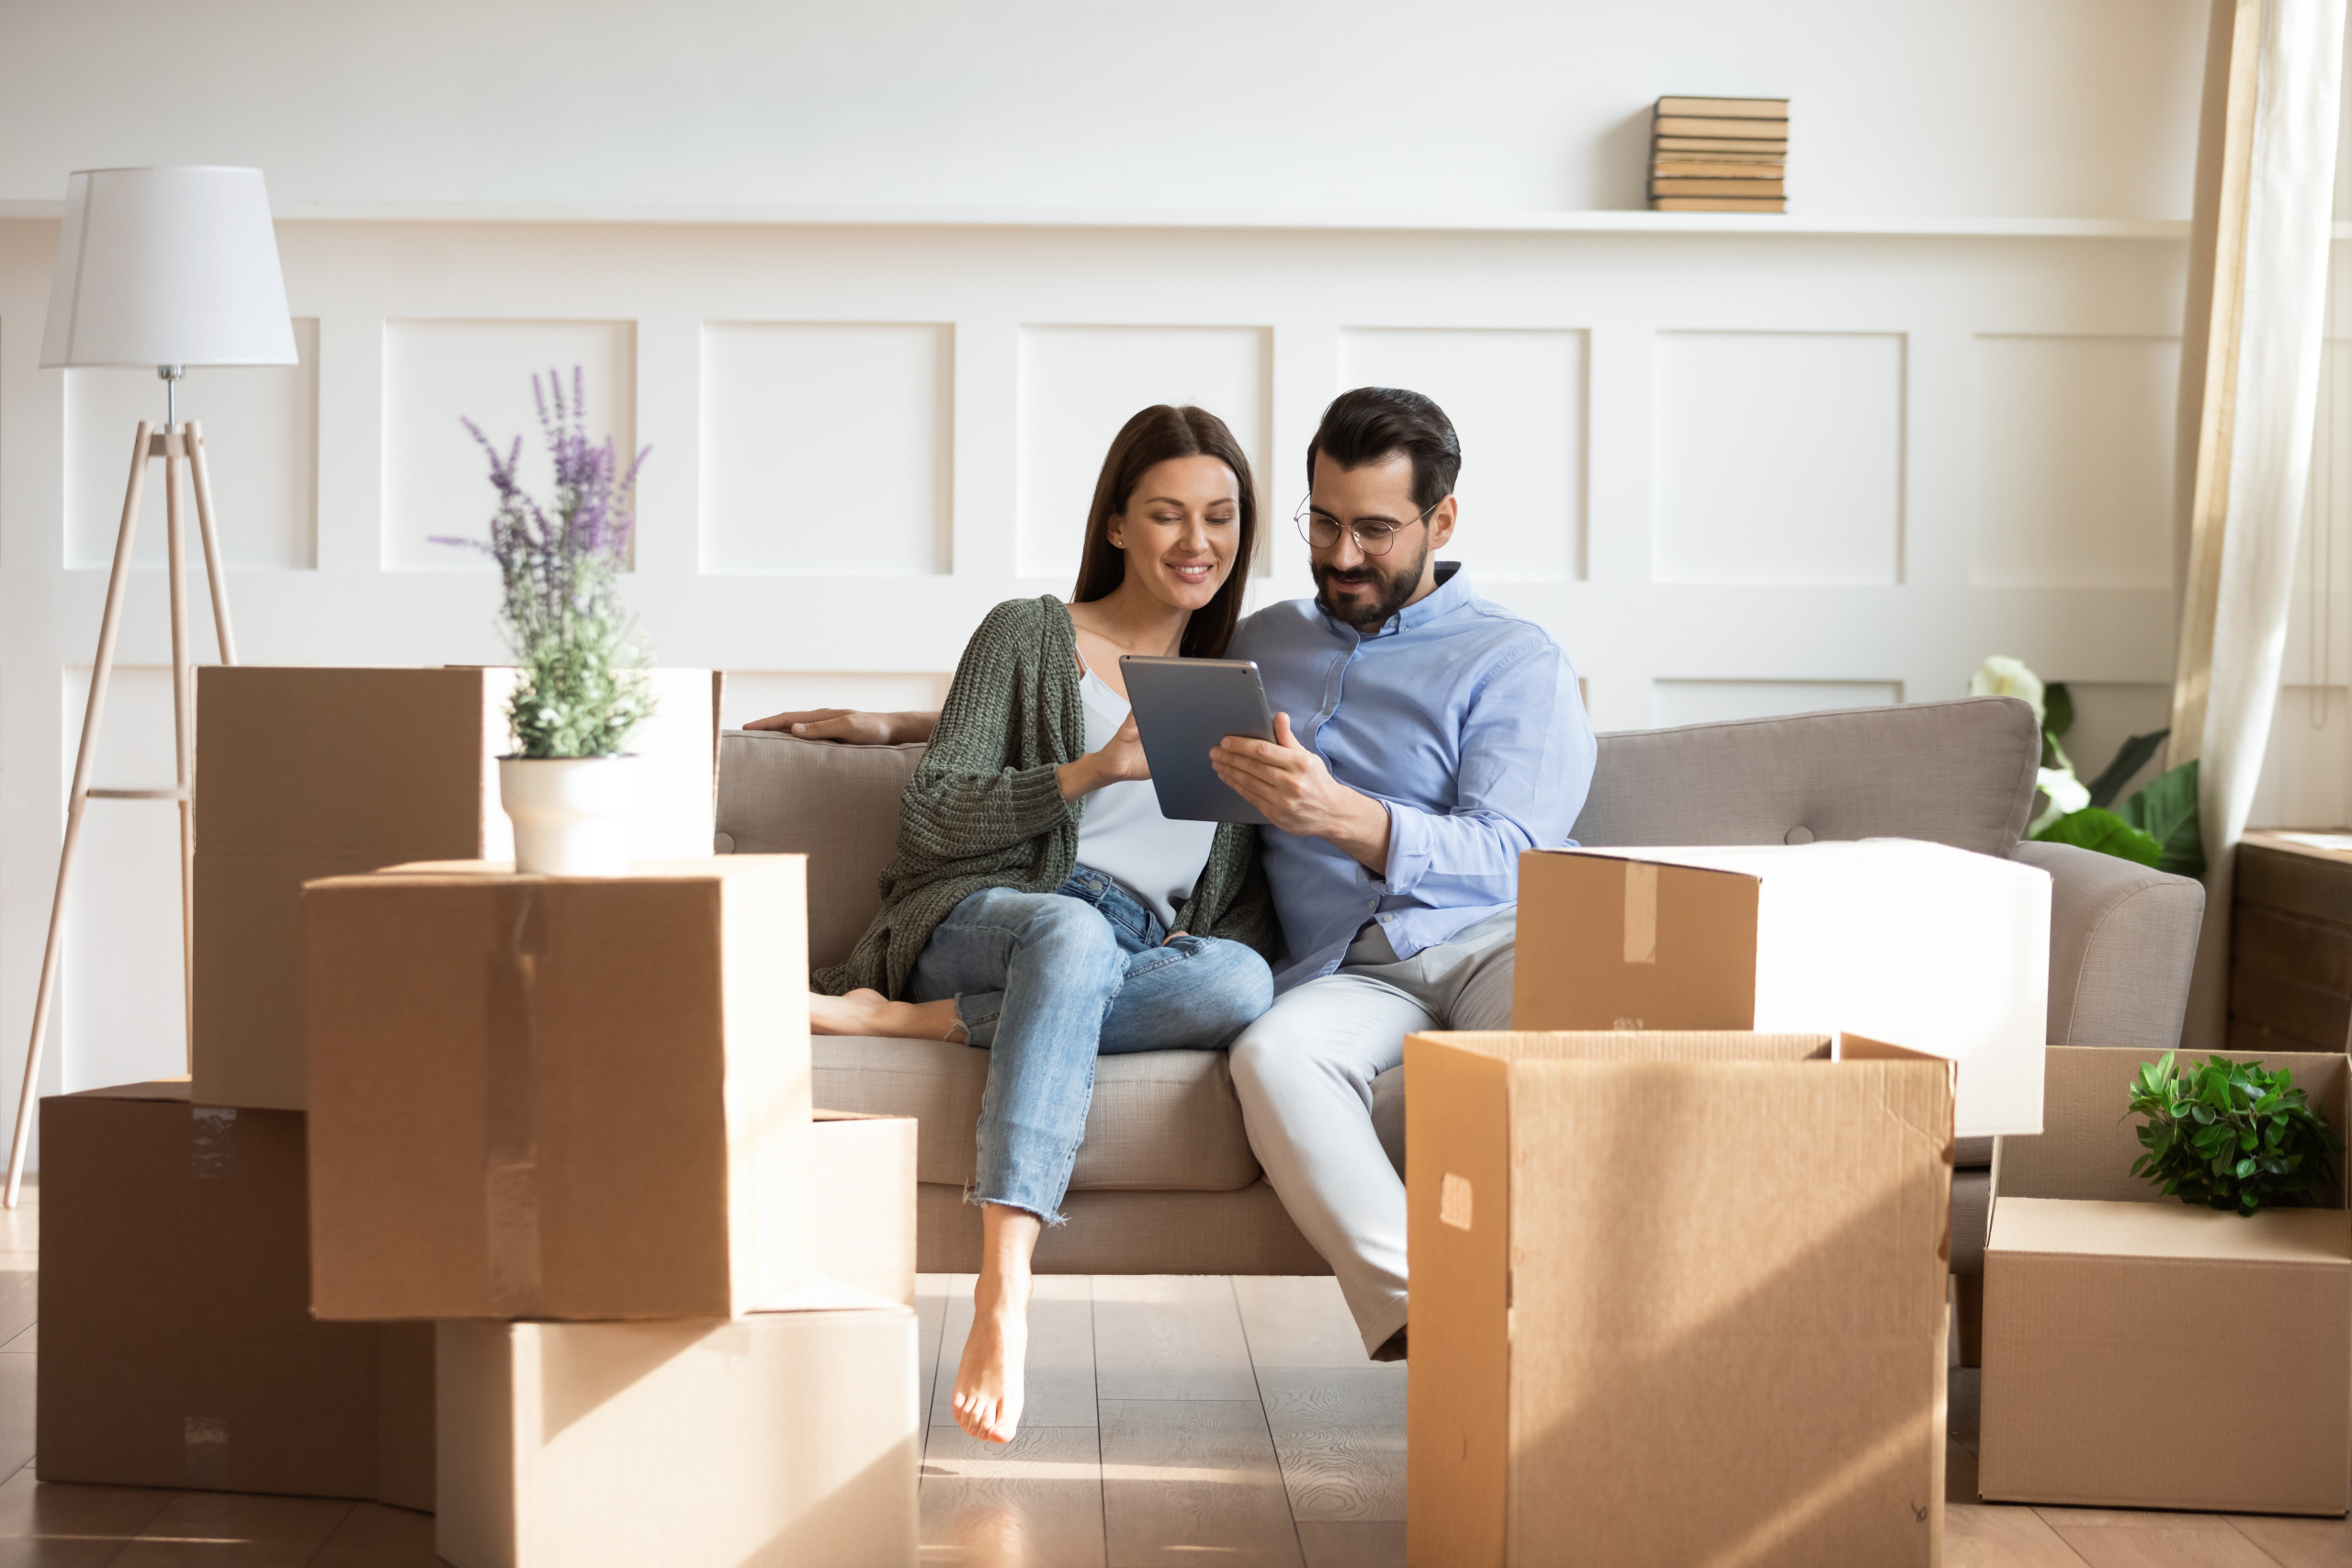 Apps for Moving: The Only List You Need